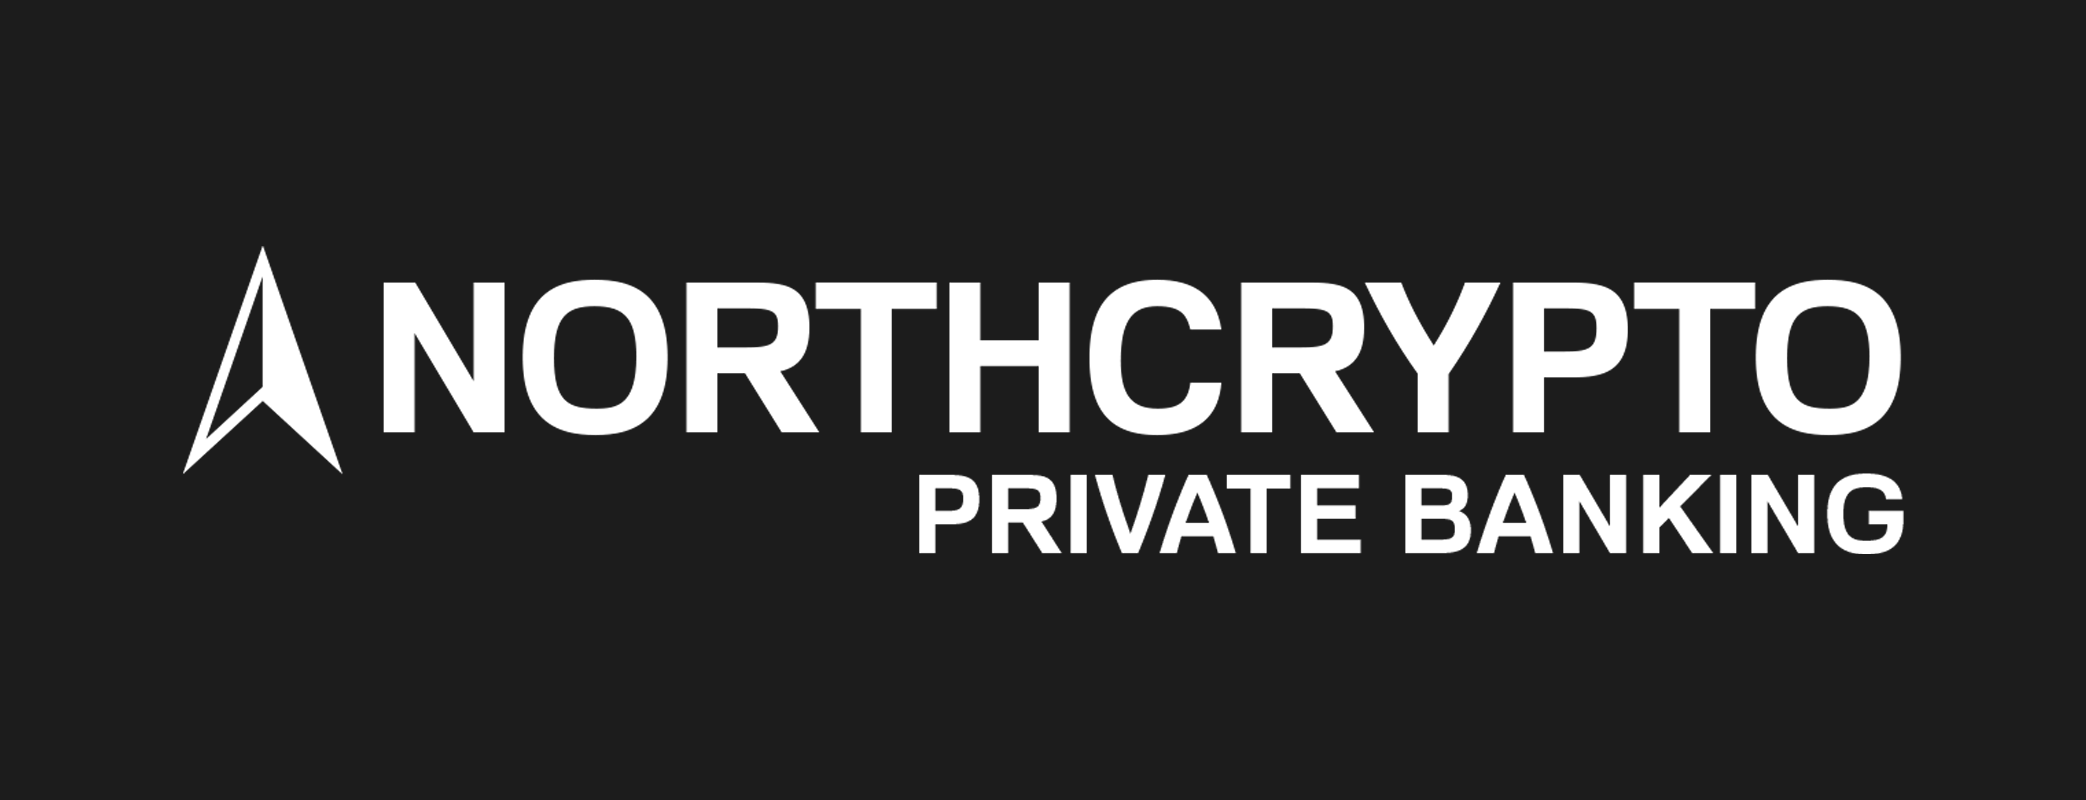 Finnish cryptocurrency company Northcrypto launches a Private Banking service